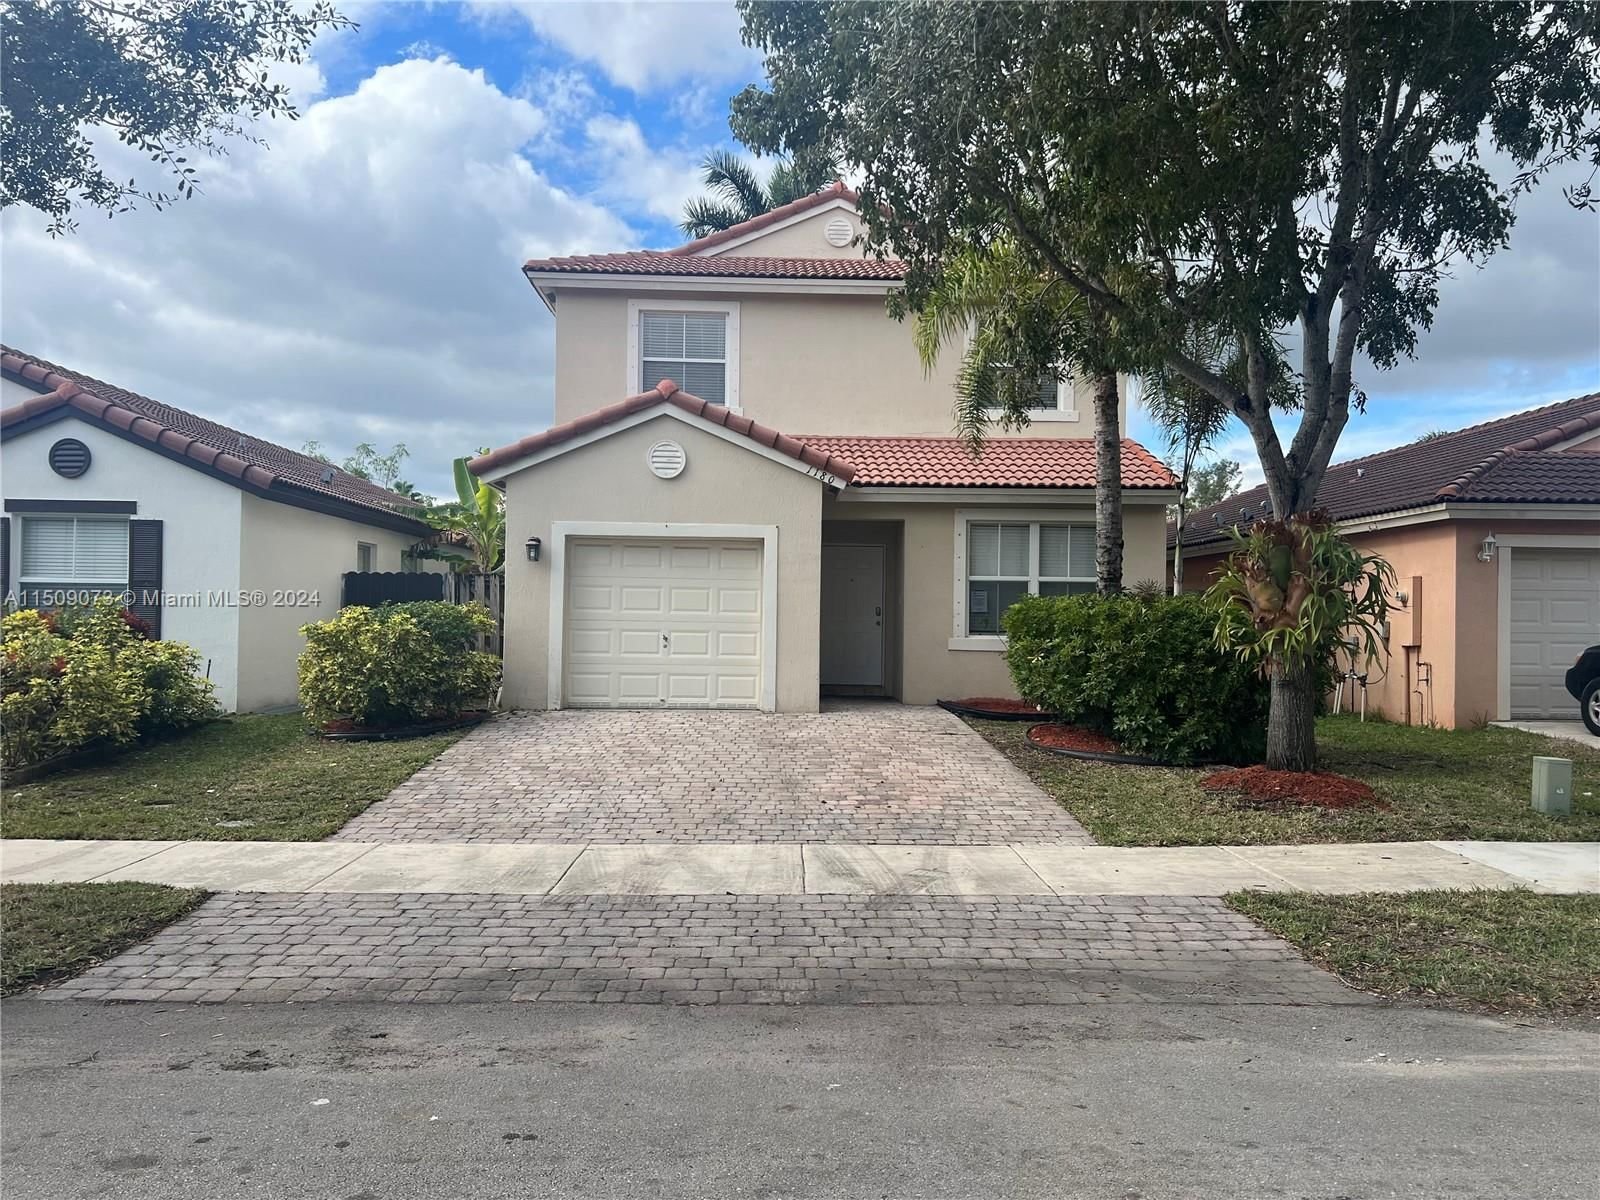 Real estate property located at 1180 19th Ave, Miami-Dade County, SHORES AT KEYS GATE, Homestead, FL